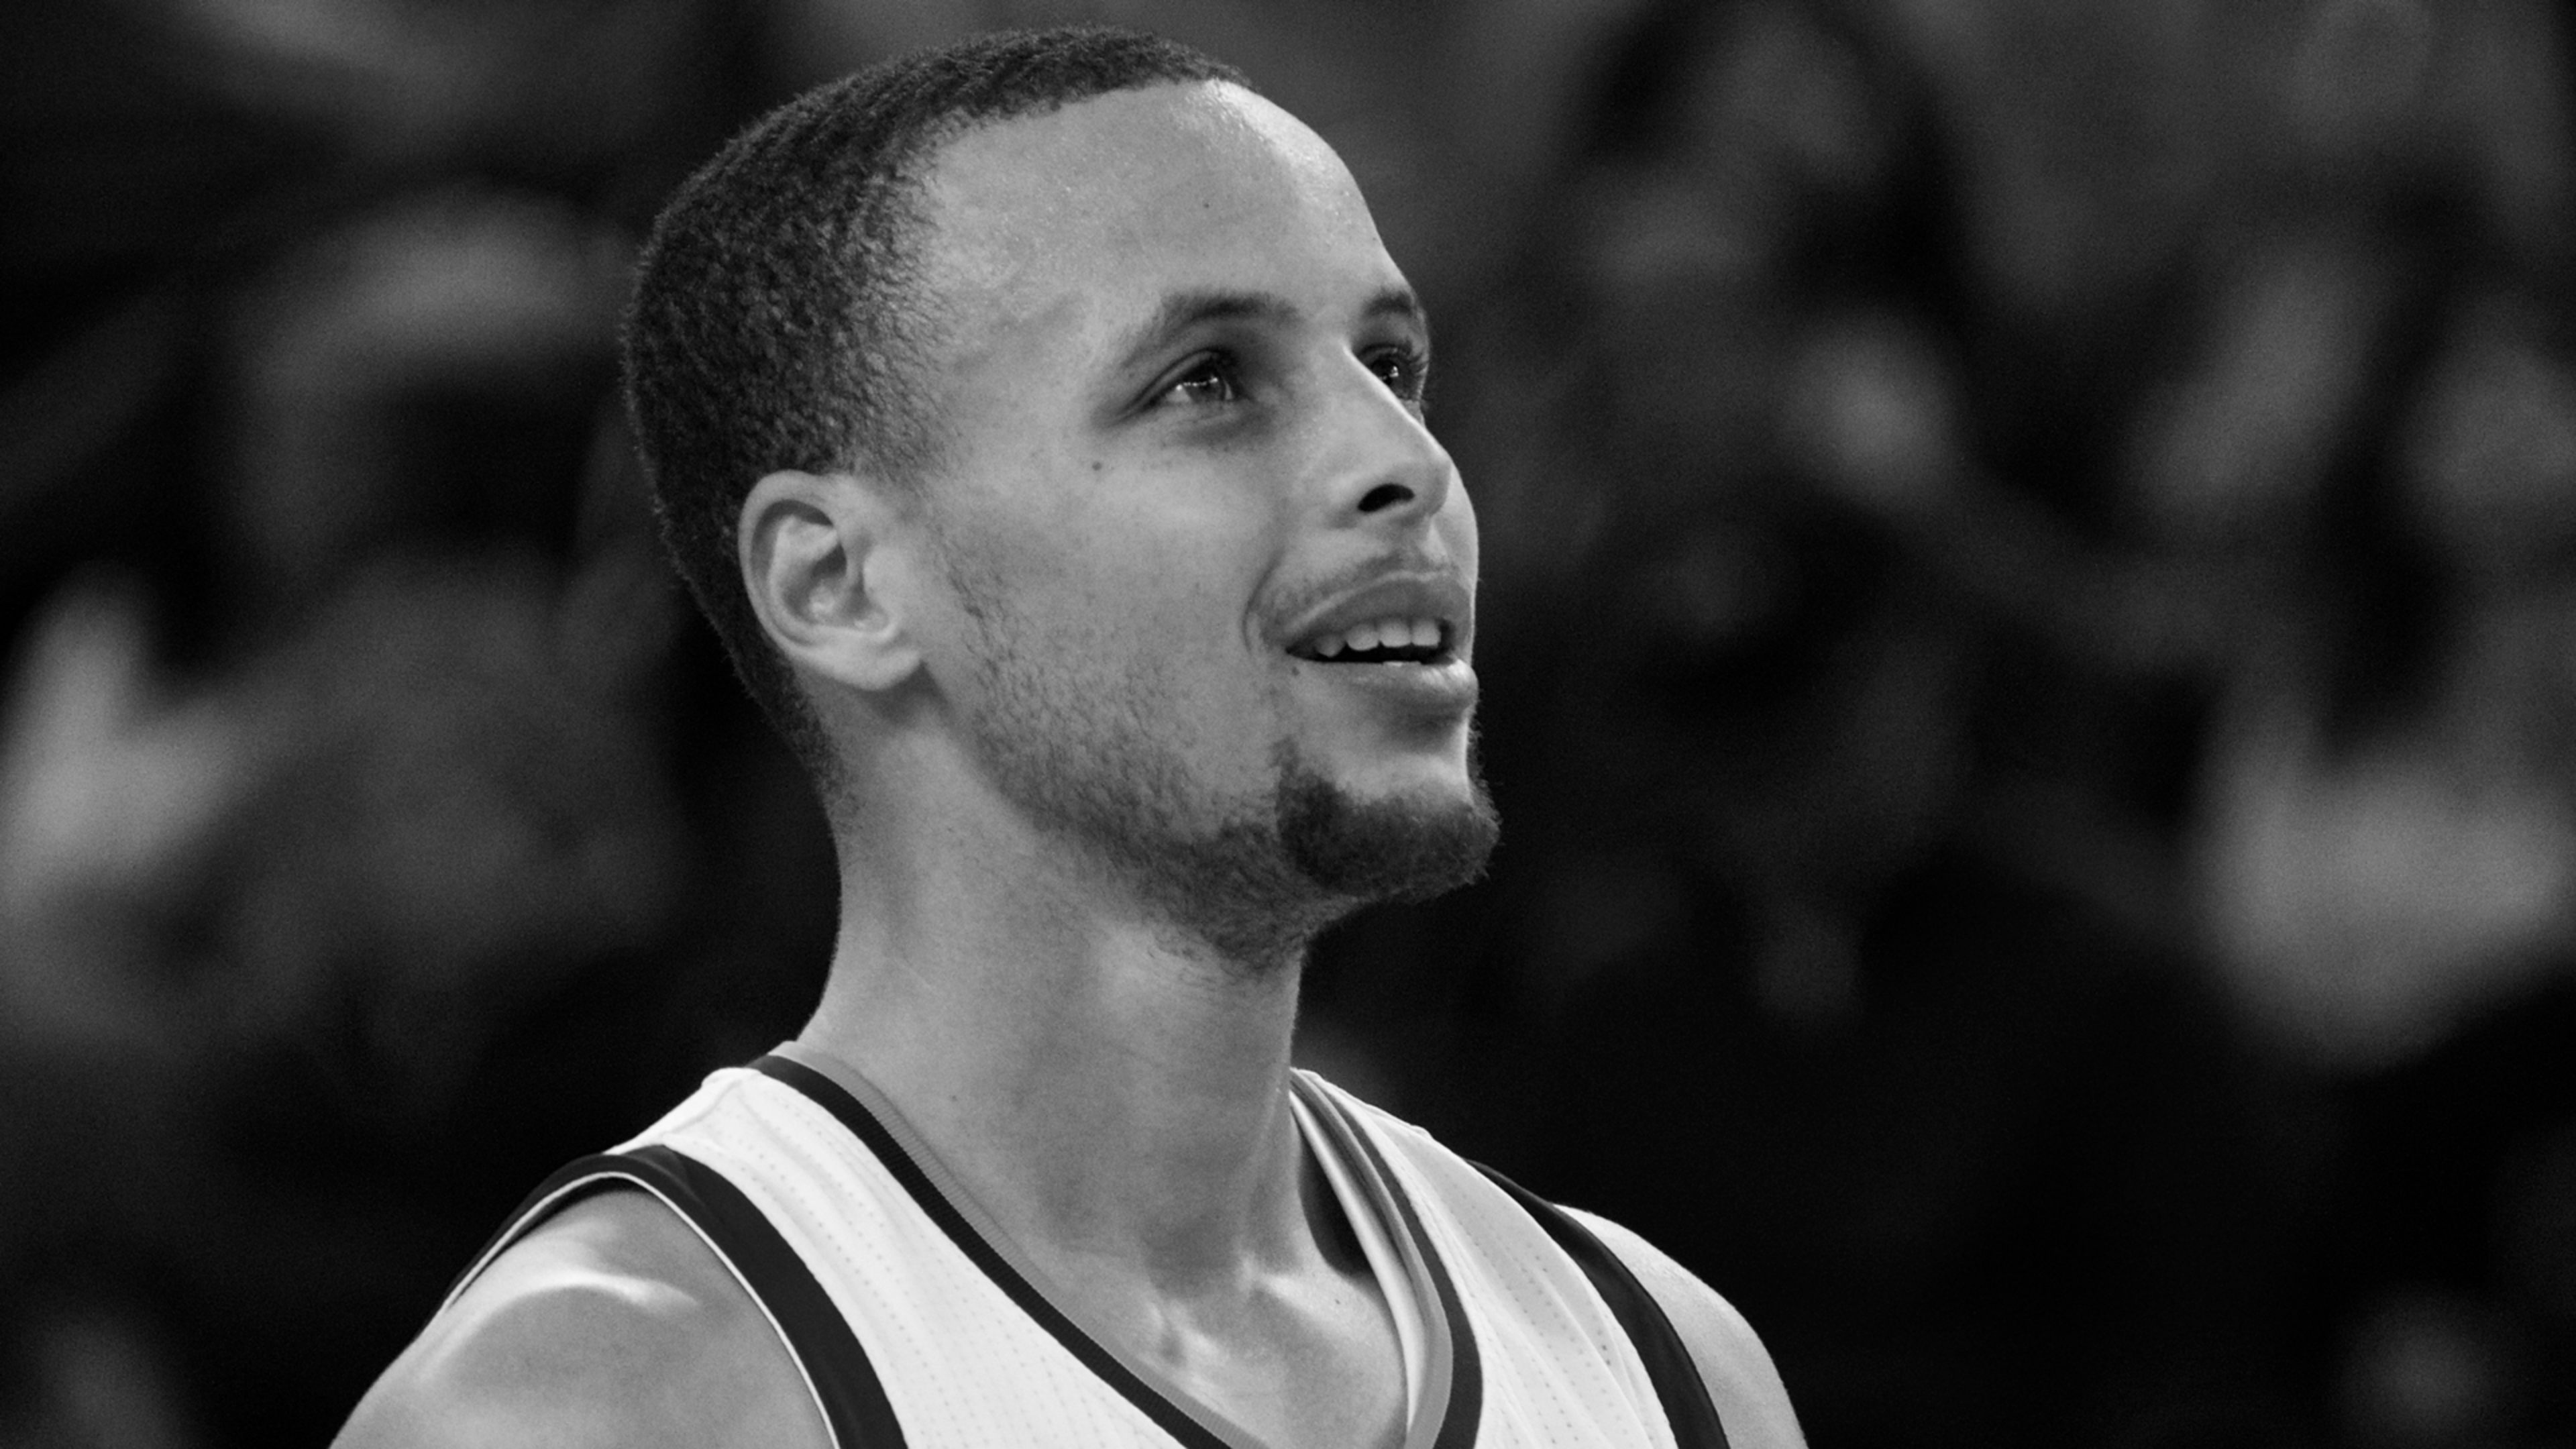 After his conspiracy “joke,” Steph Curry will inspect NASA’s moon rocks